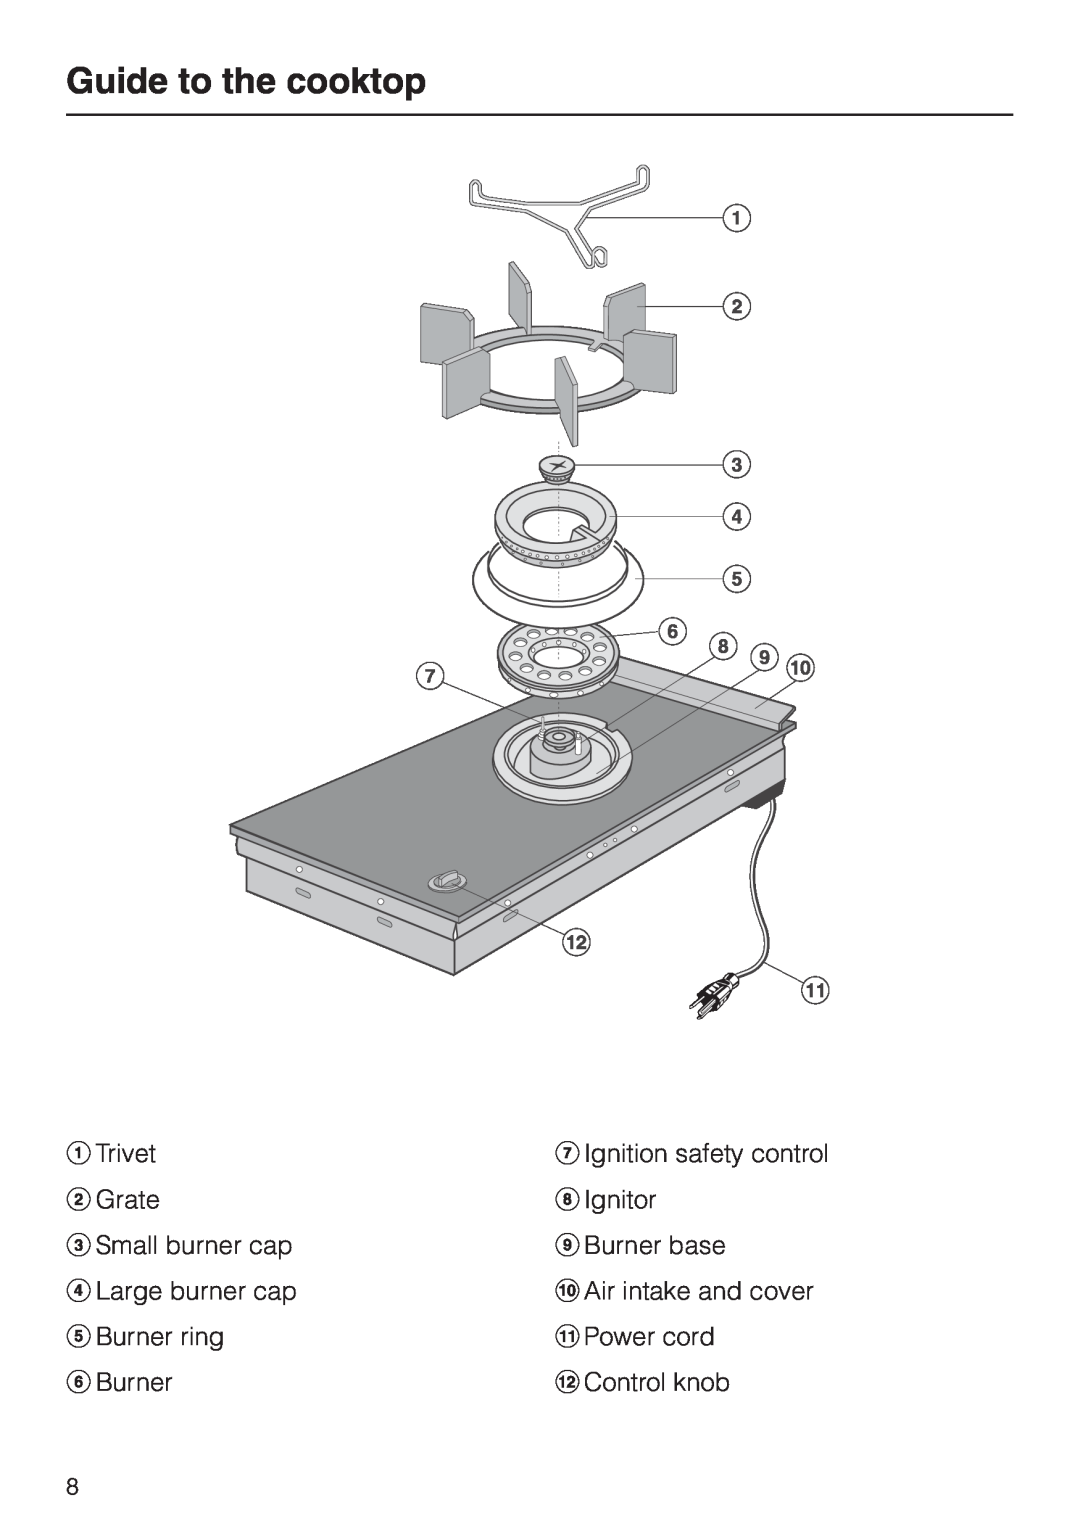 Miele KM 406 manual Guide to the cooktop, b c d e f h g i jk m l 